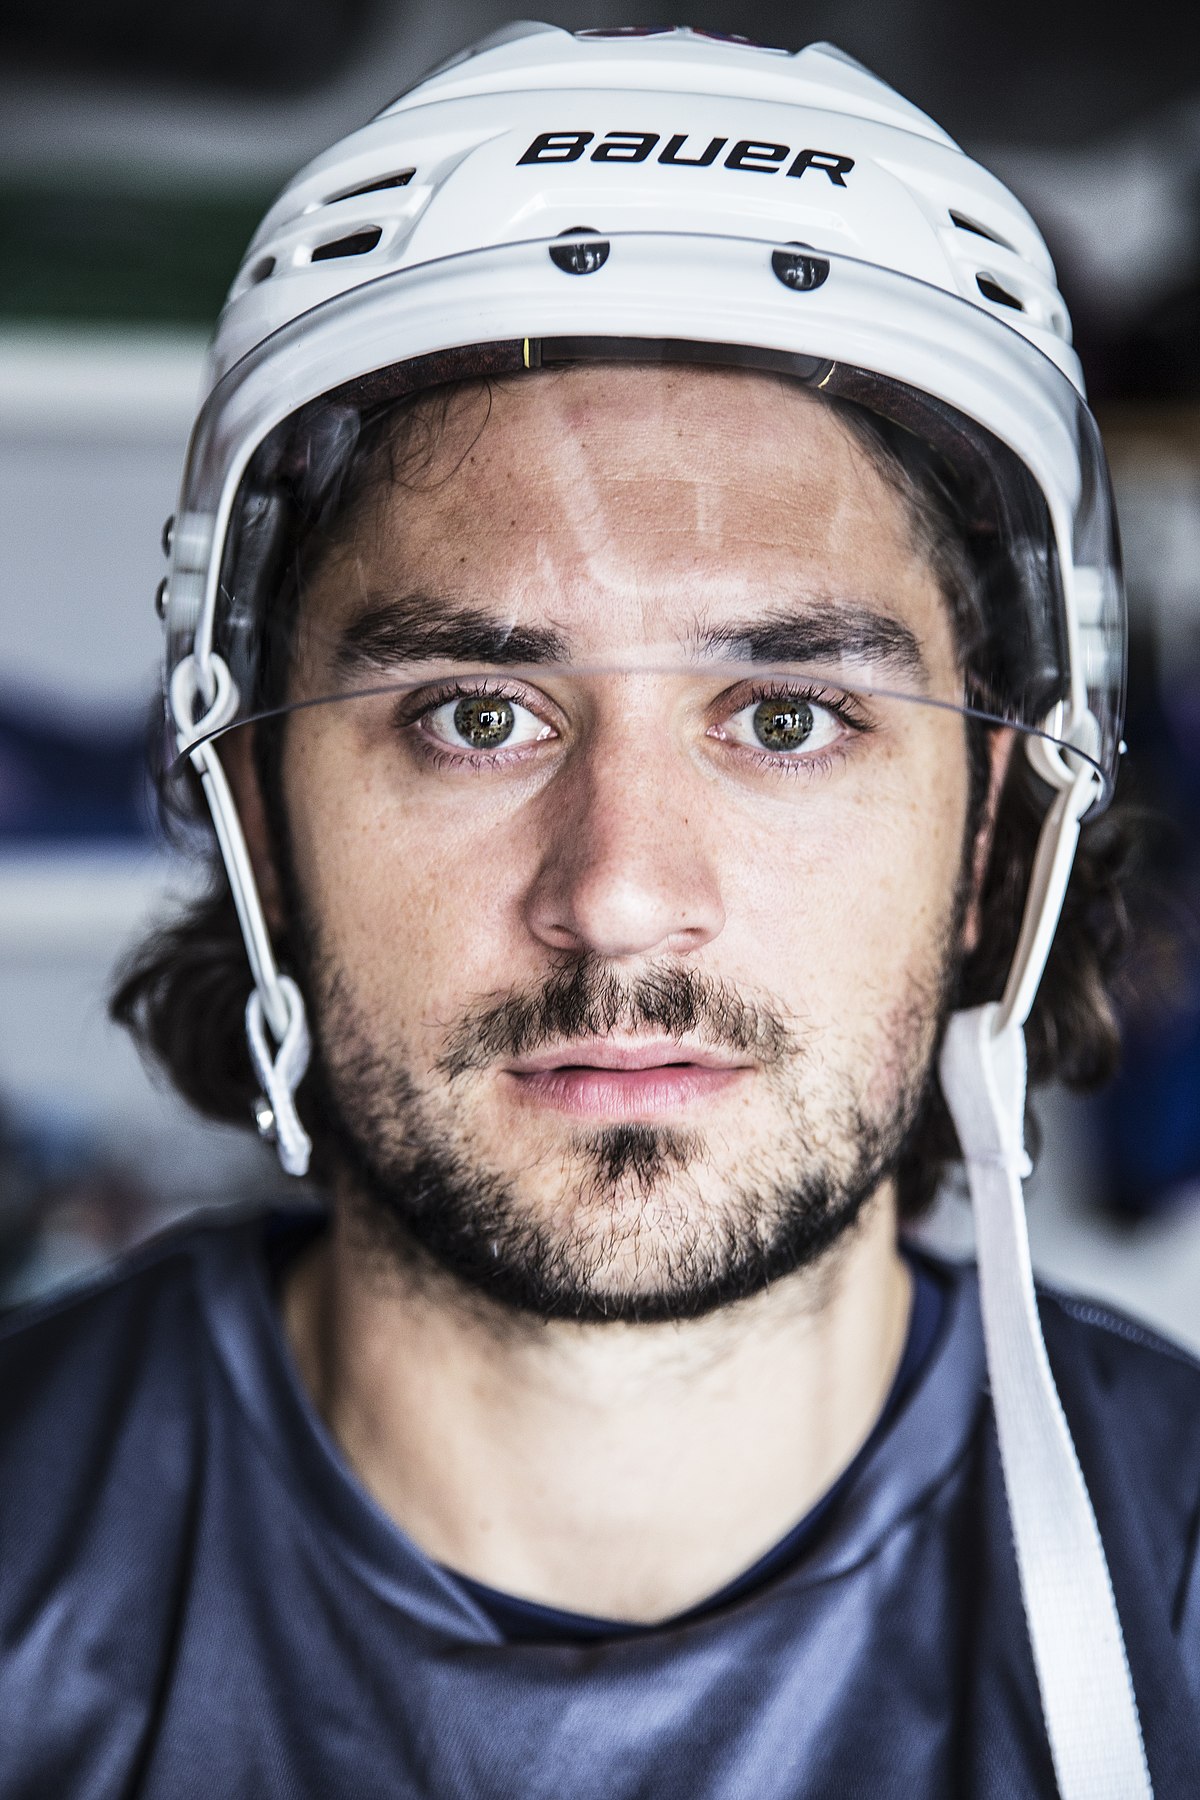 Stars acquire F Mats Zuccarello from New York for two conditional